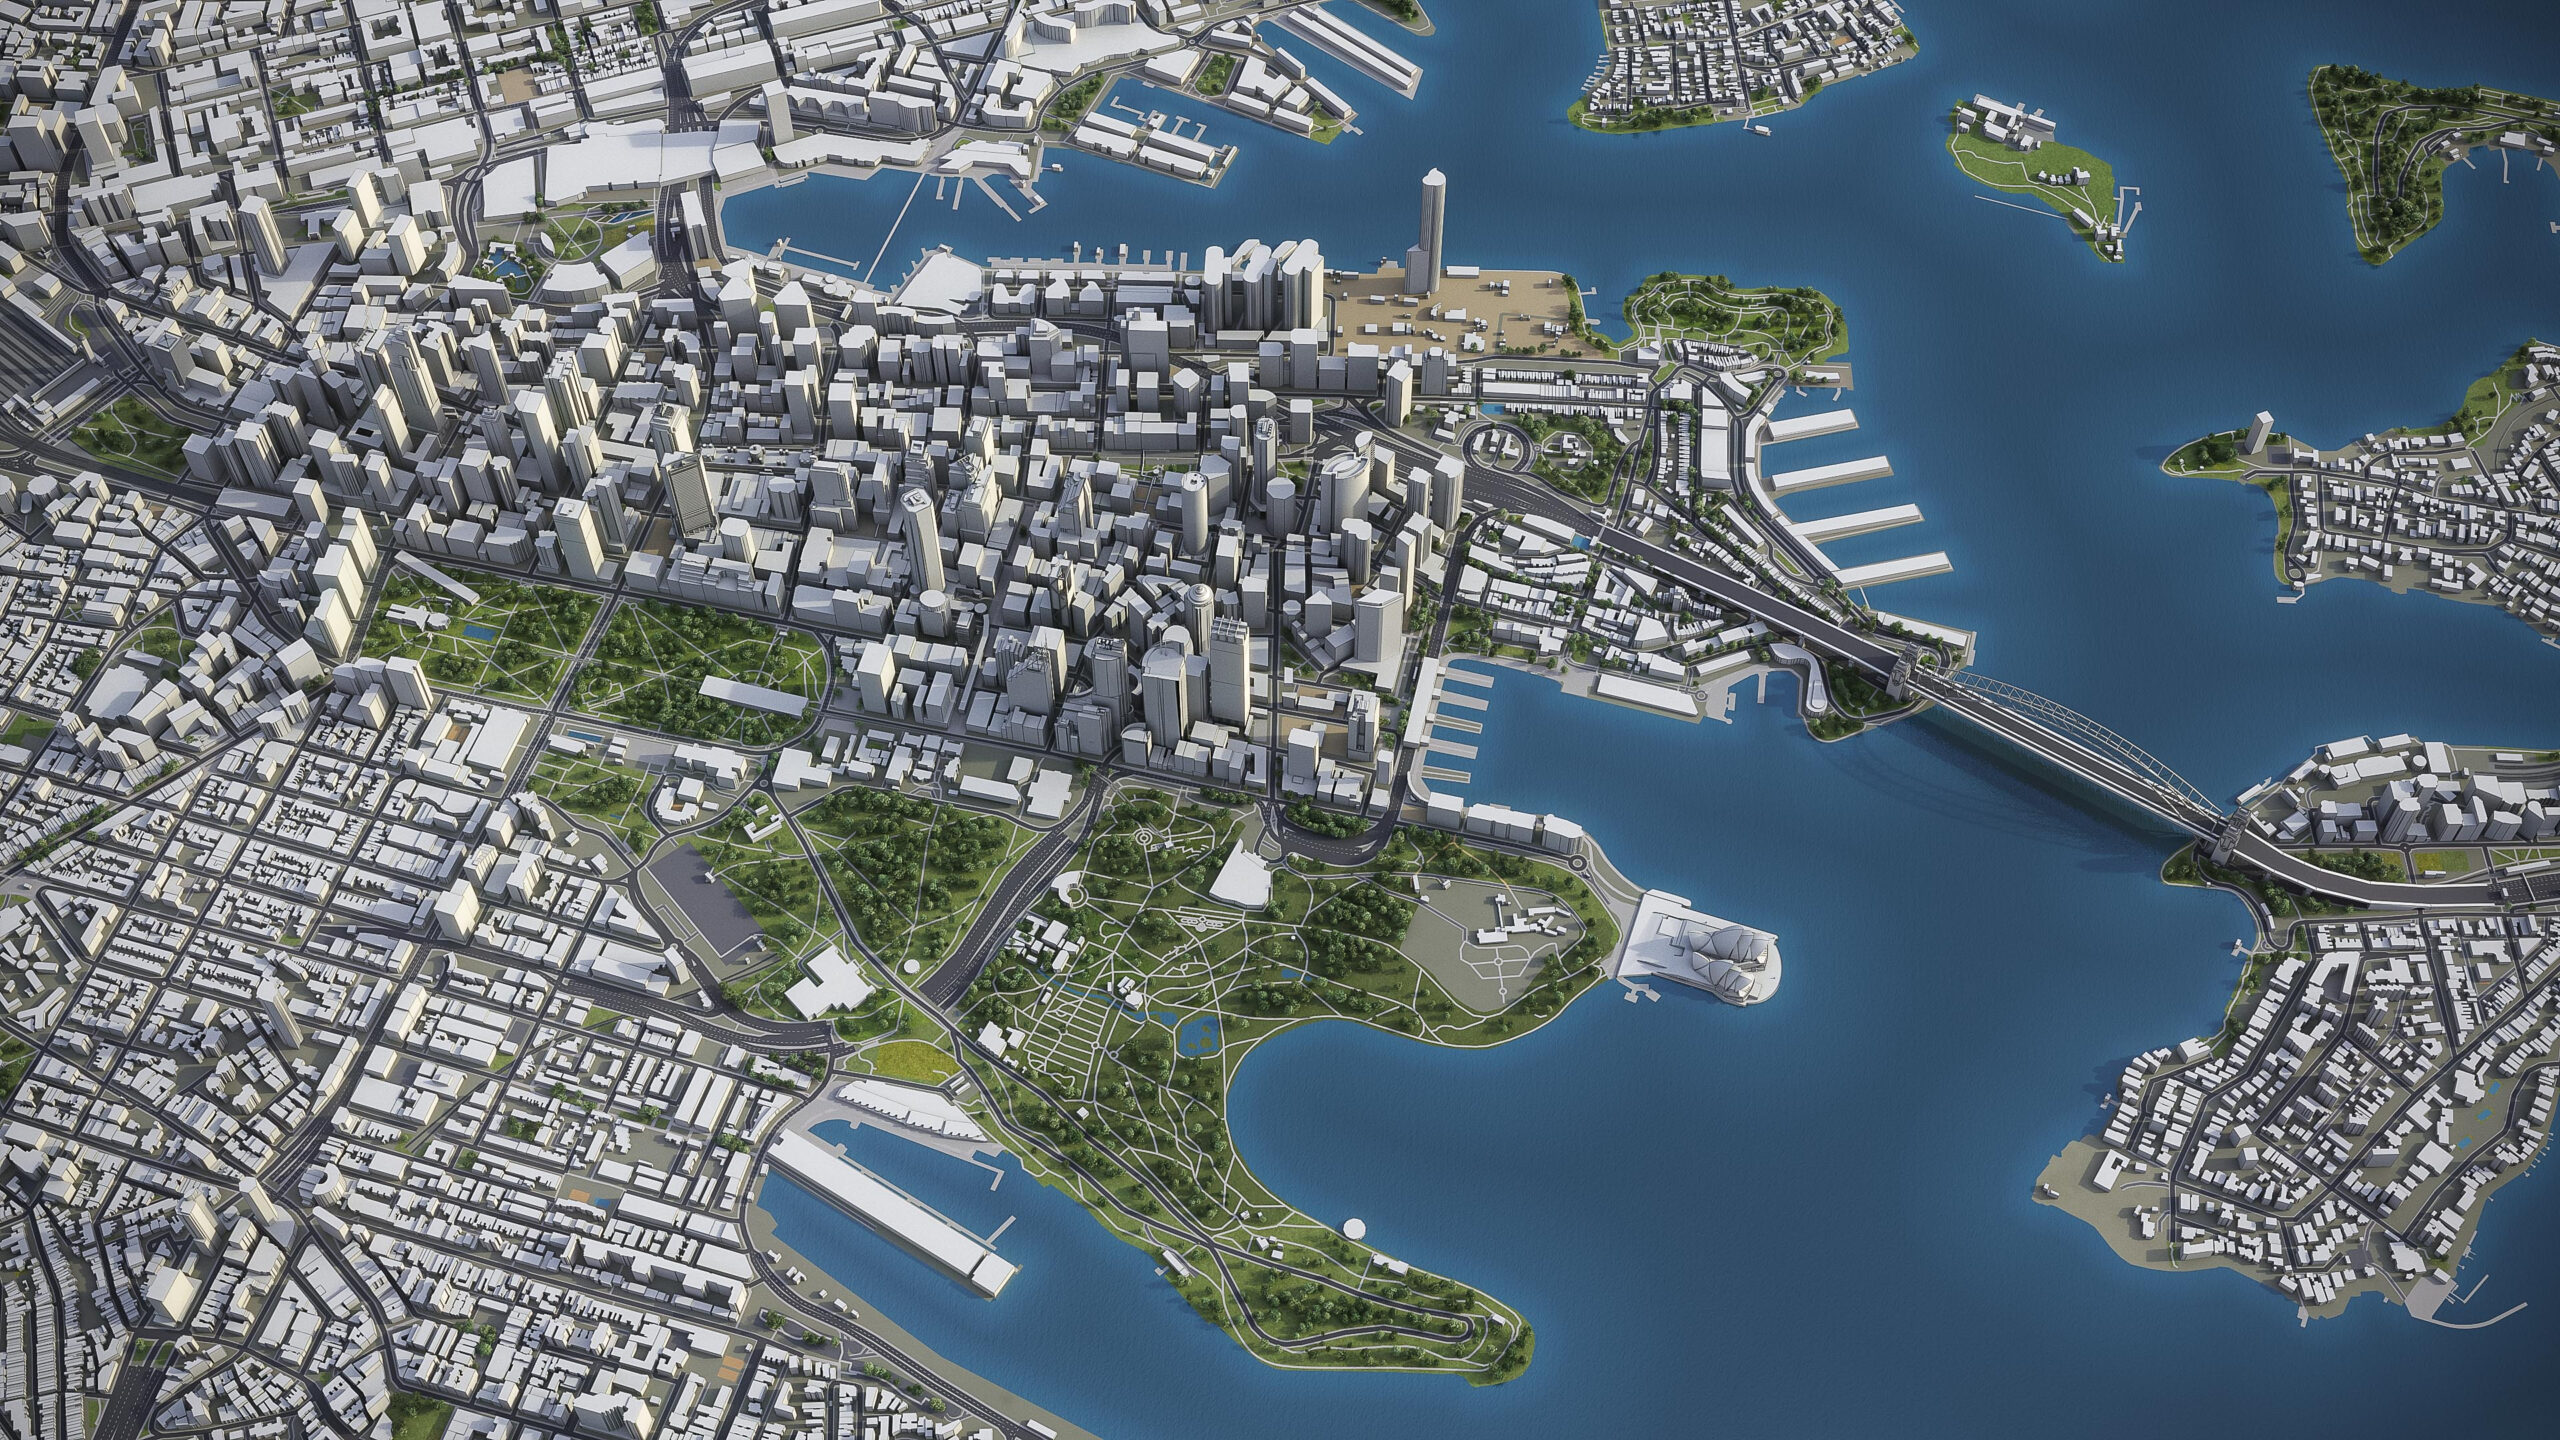 Geospatial Mapping for Urban Development: Paving the Way for Sustainable Urbanization